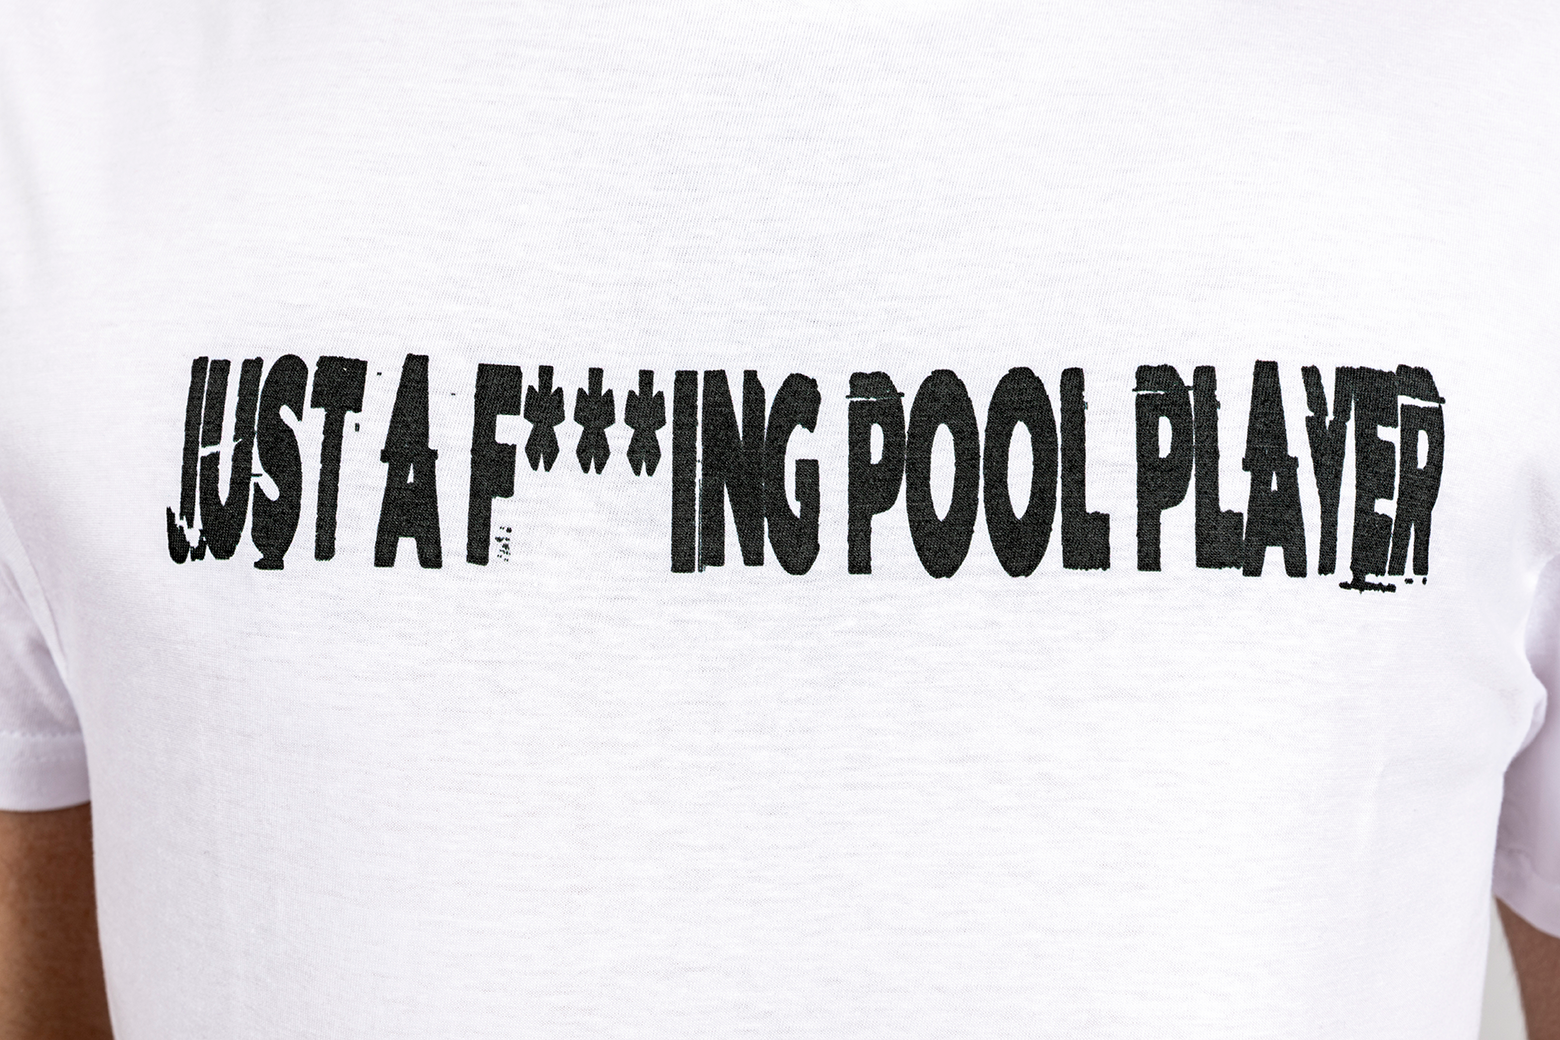 Just a F***king Pool Player T-Shirt